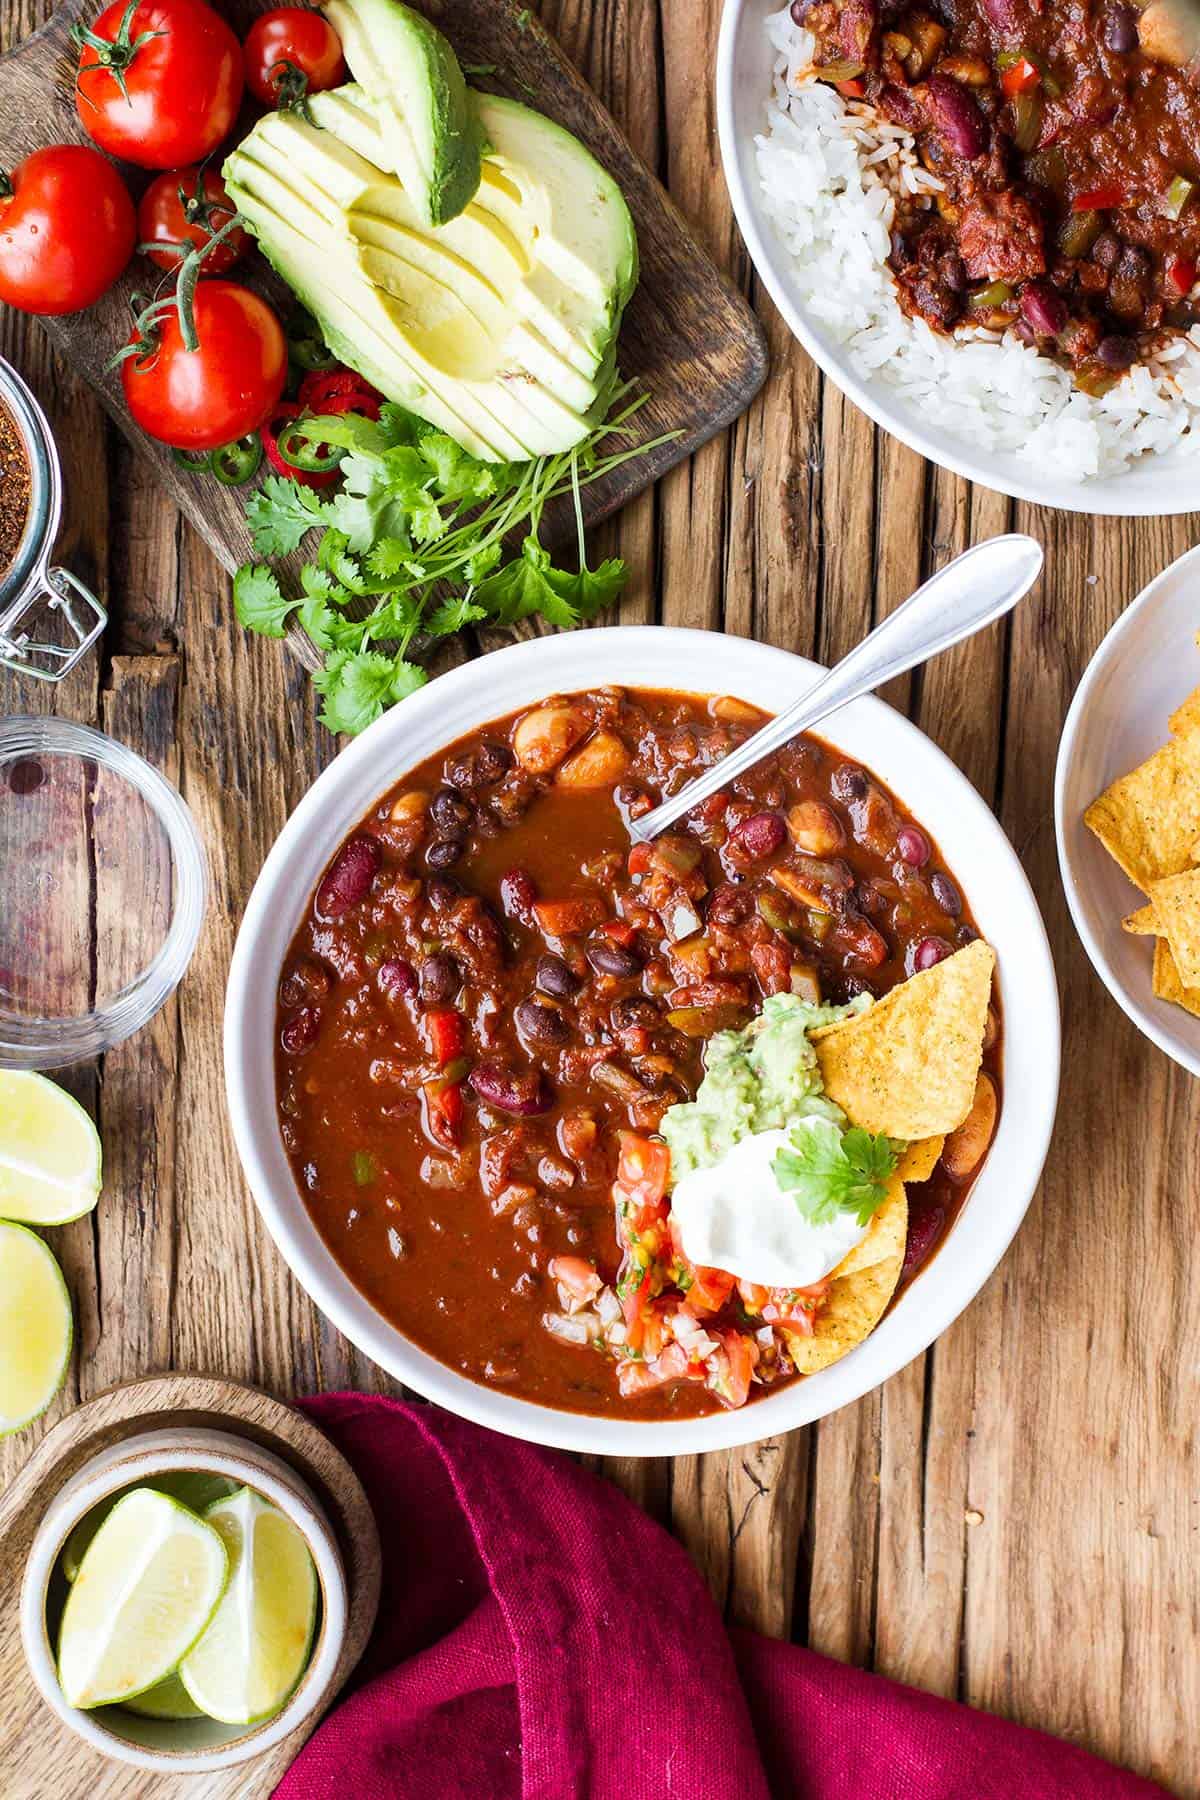 Bowl of vegan chili, topped with sour cream and guacamole.